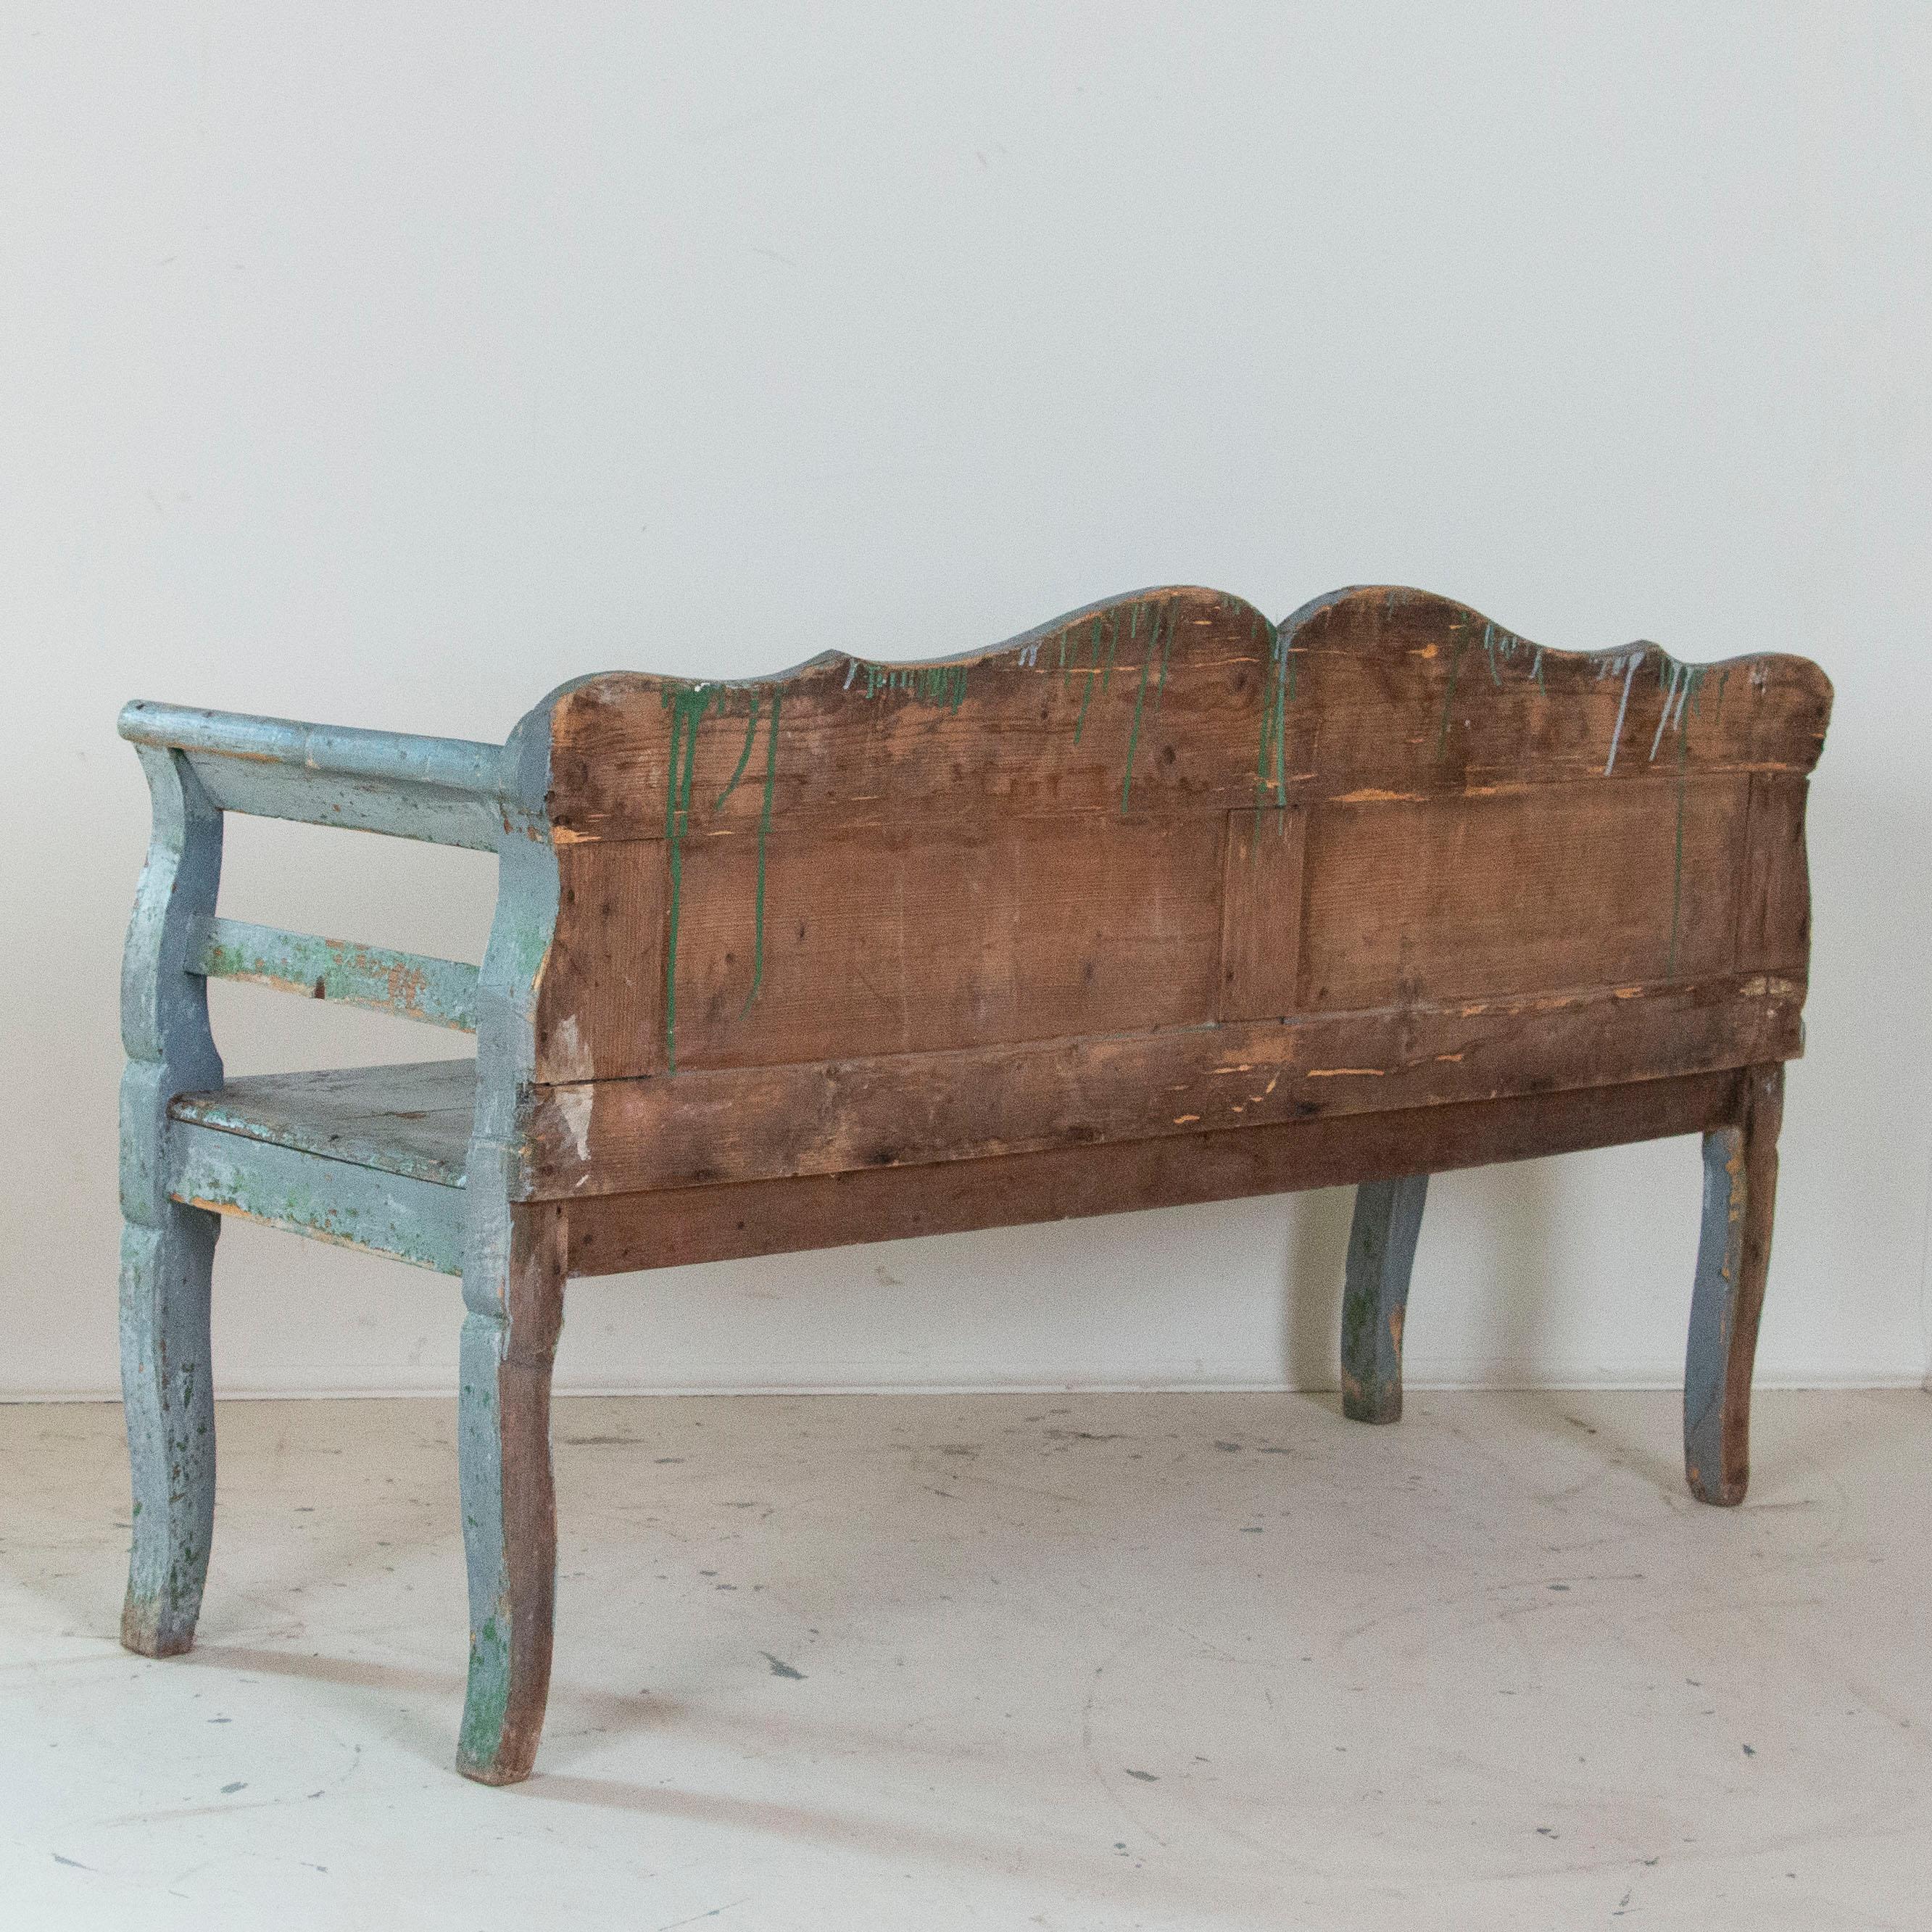 Antique Hand Painted Blue Bench, Hungary 2